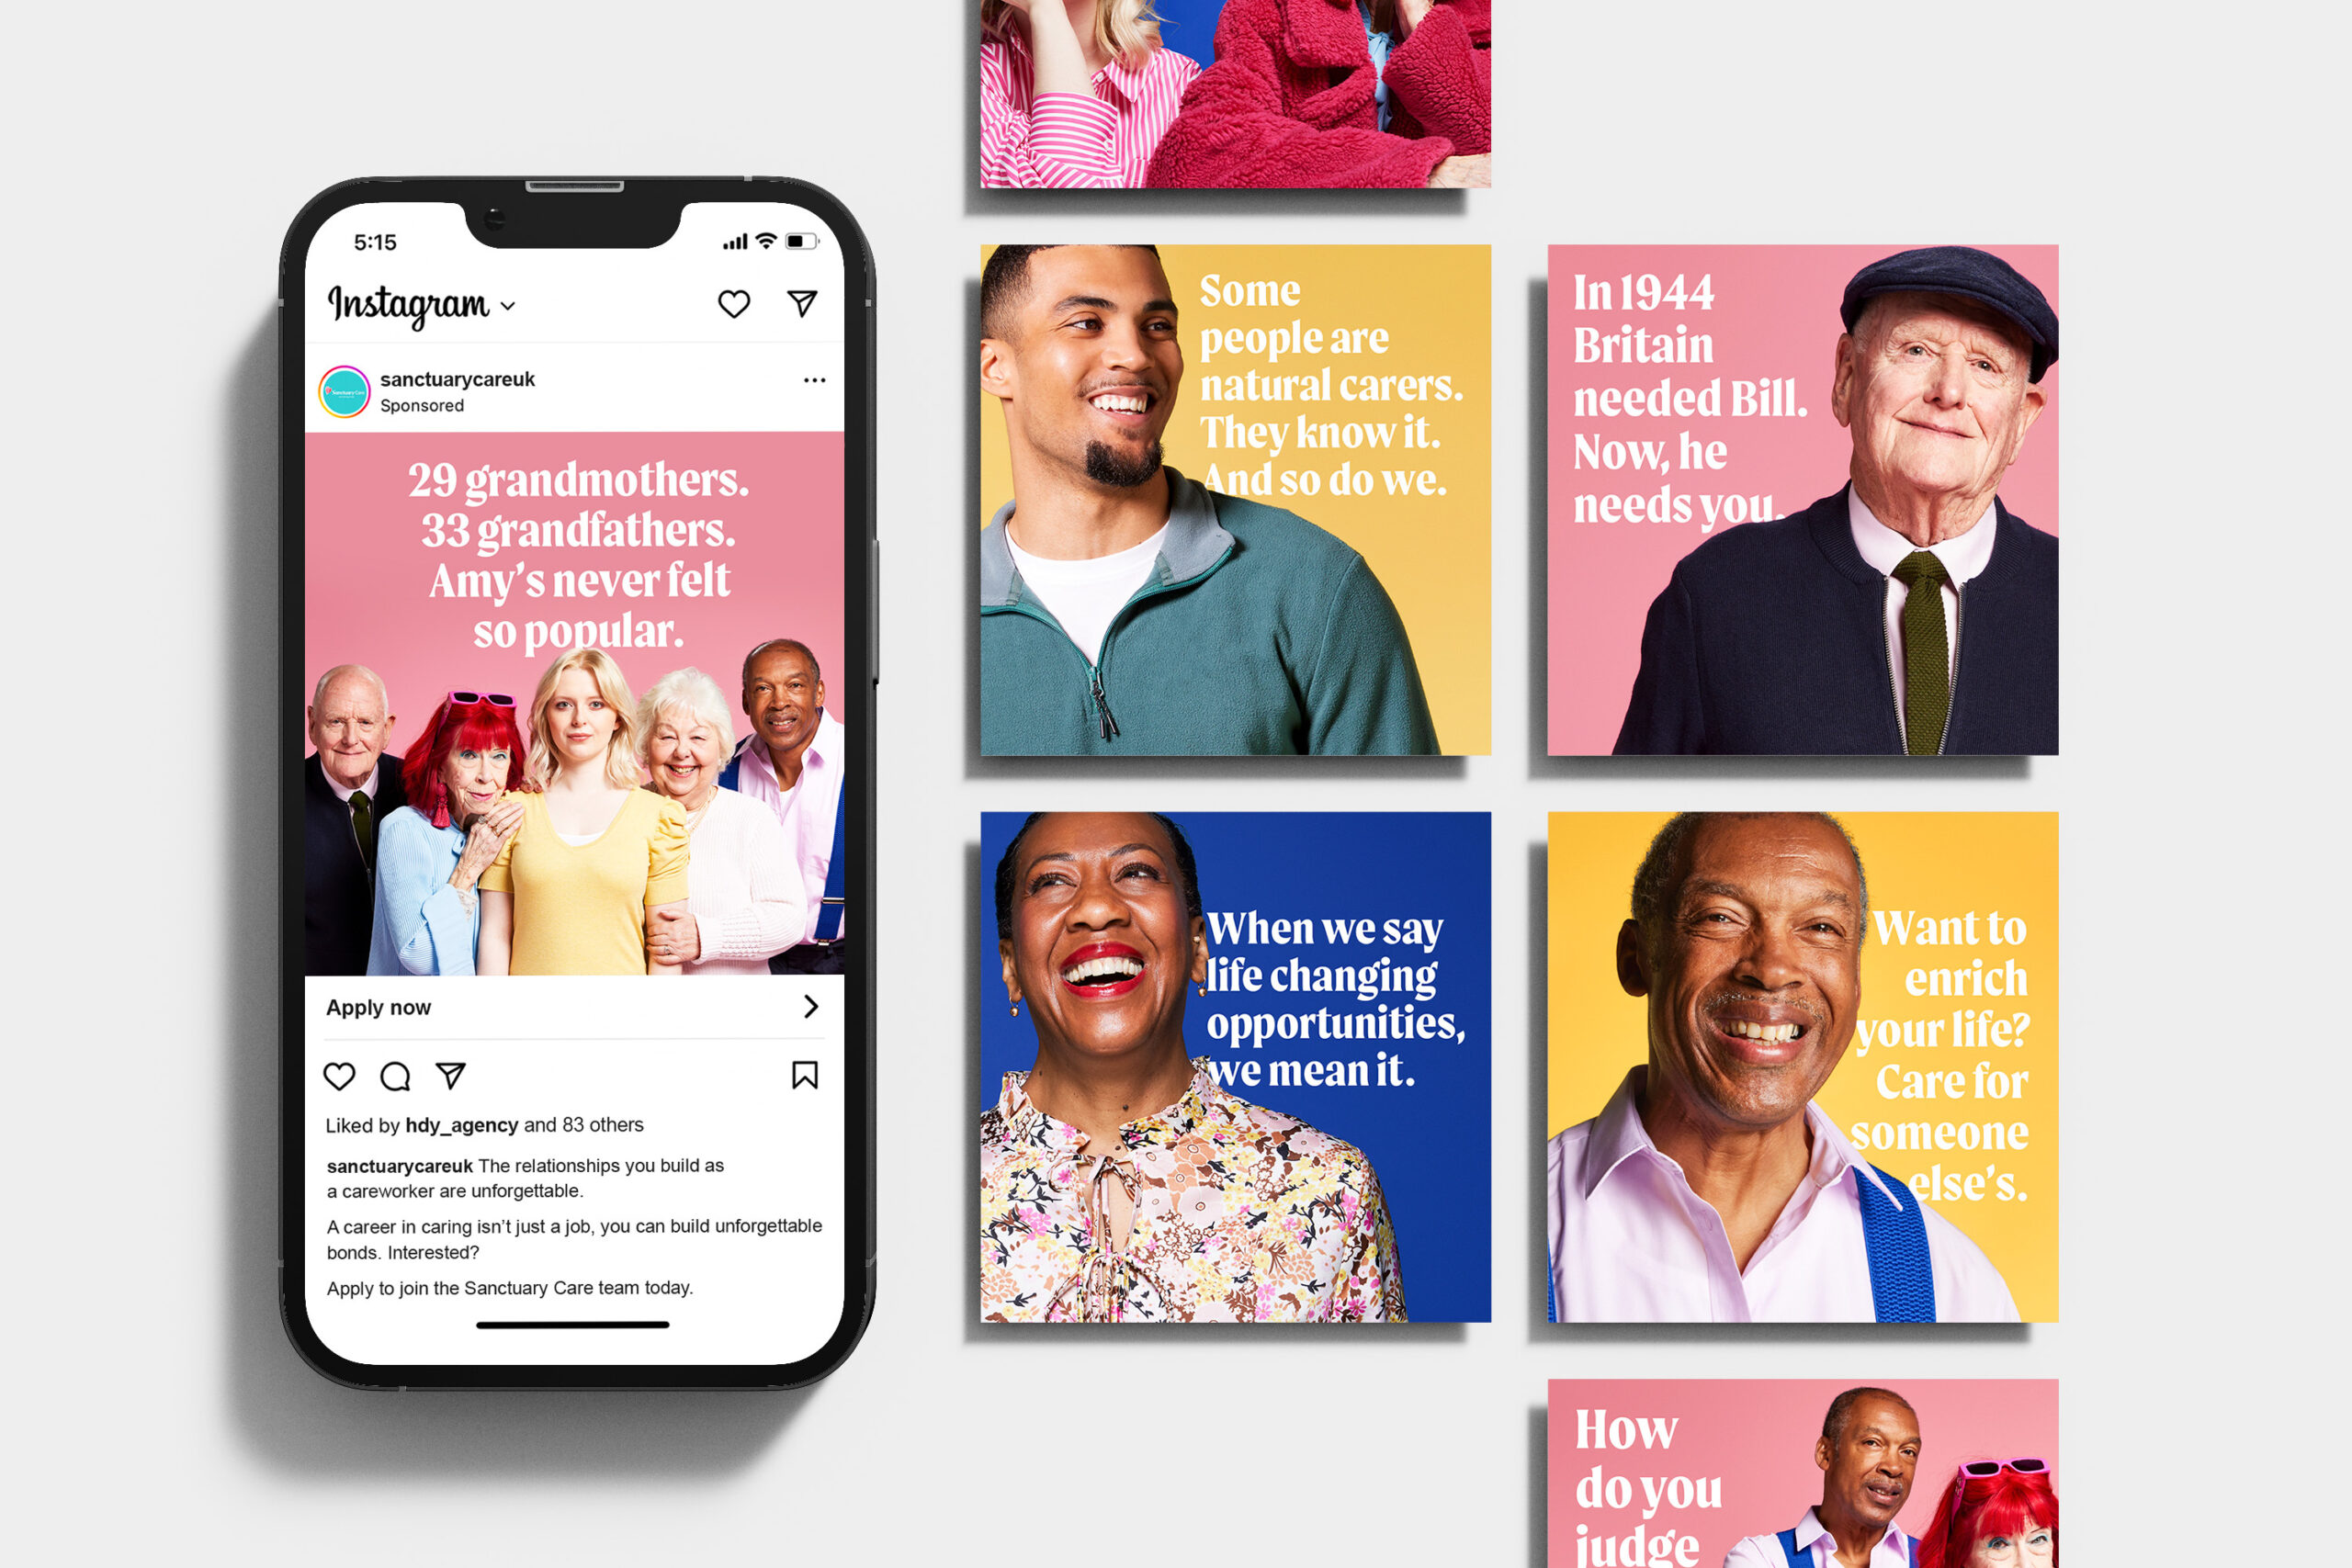 Mobile phone demonstrating a Sanctuary care ad on Instagram. The ad includes images of senior adults smiling and laughing.